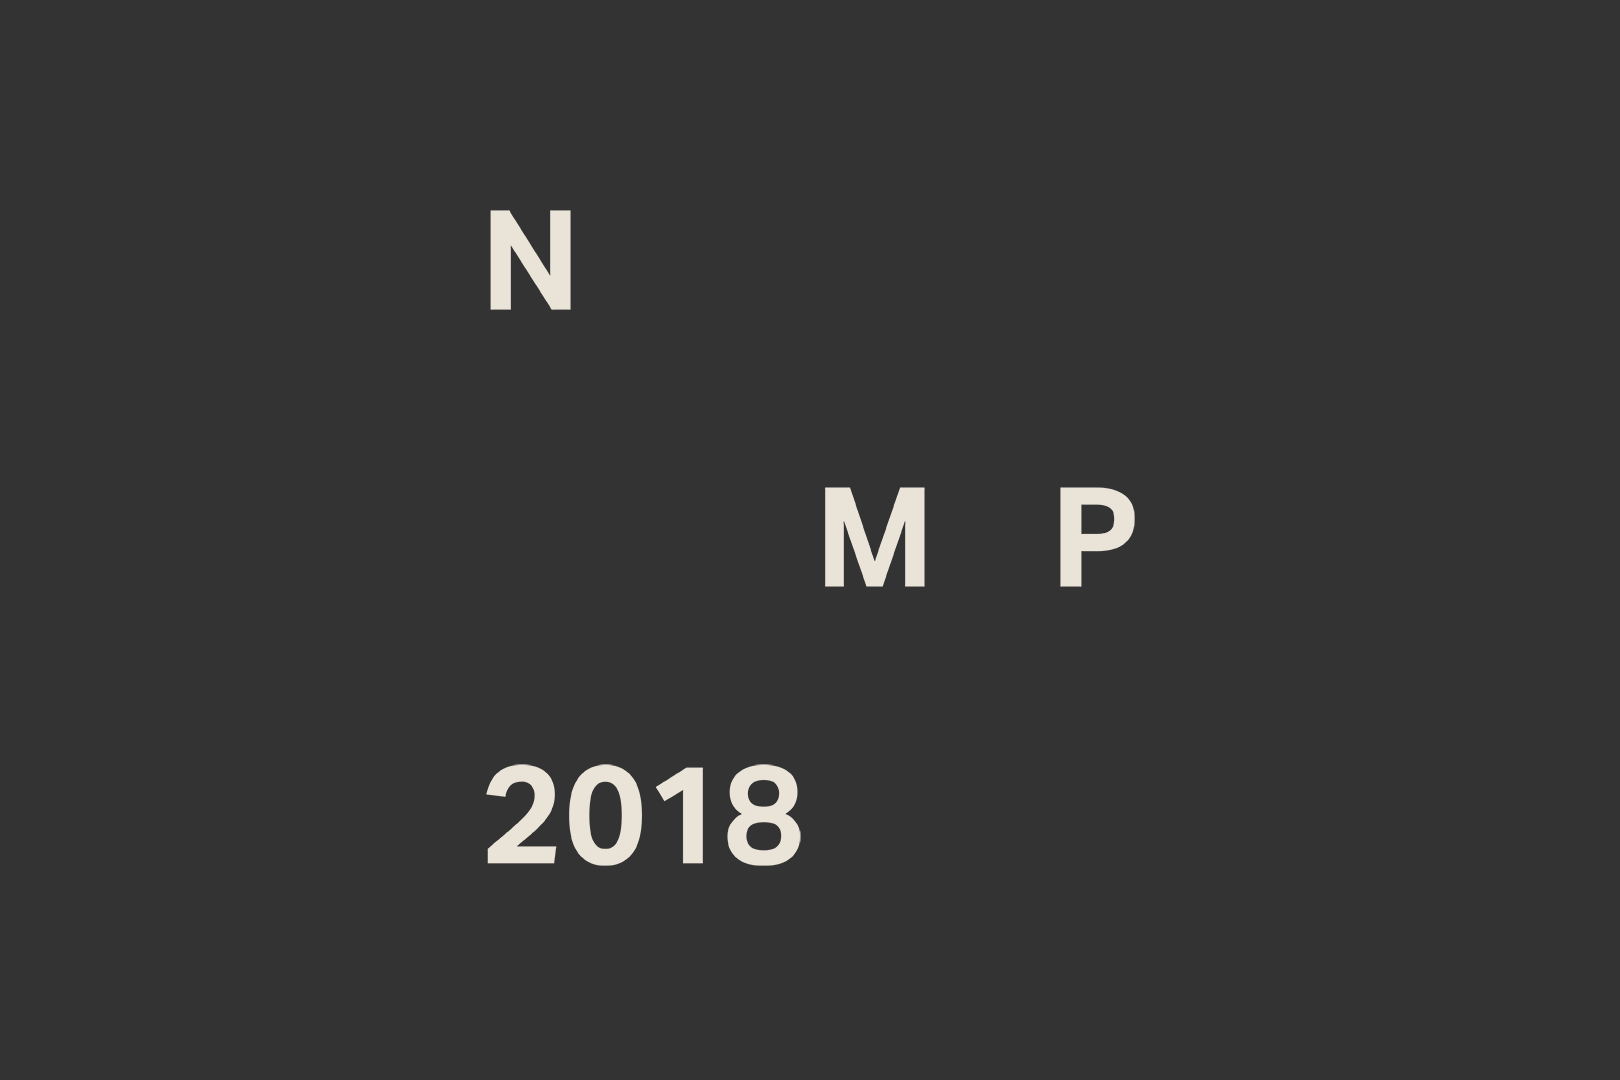 Visual identity for the NMP award.